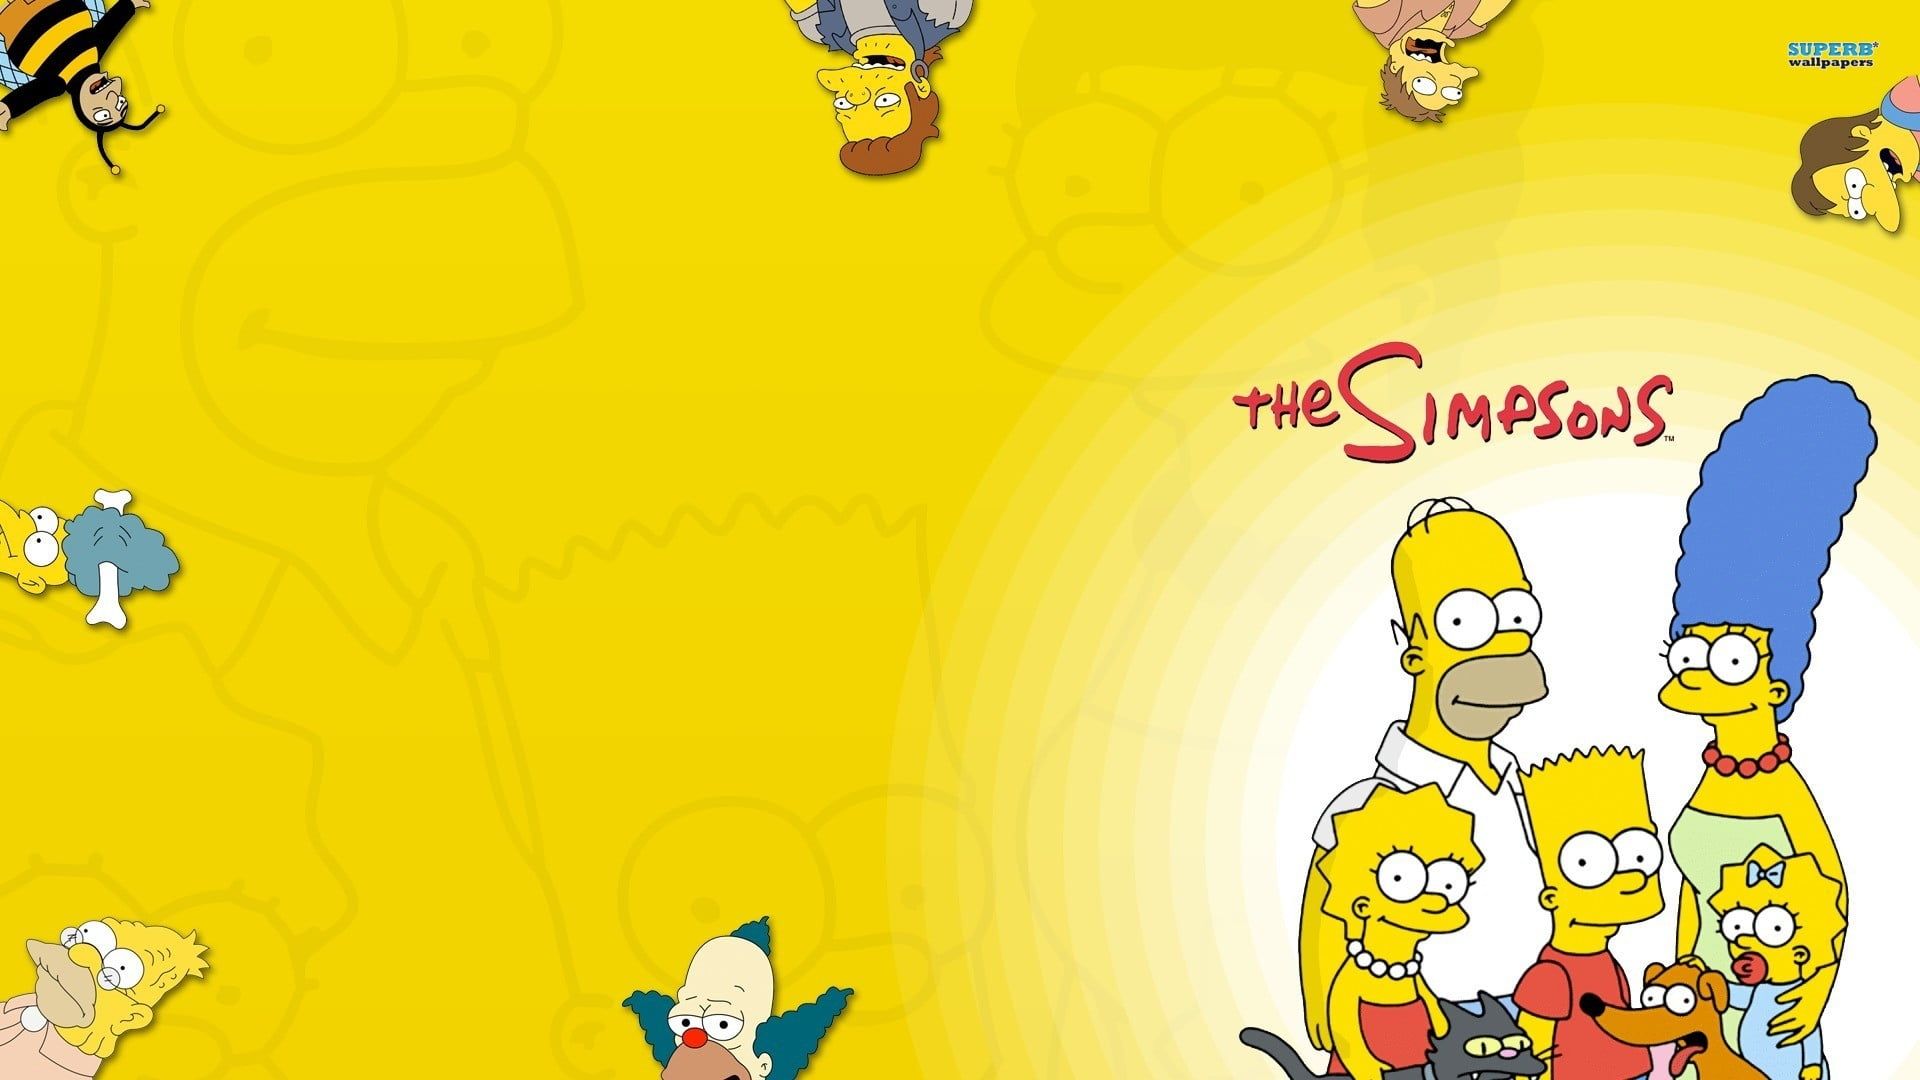 The Simpsons wallpaper, The Simpsons, Homer Simpson, Marge Simpson